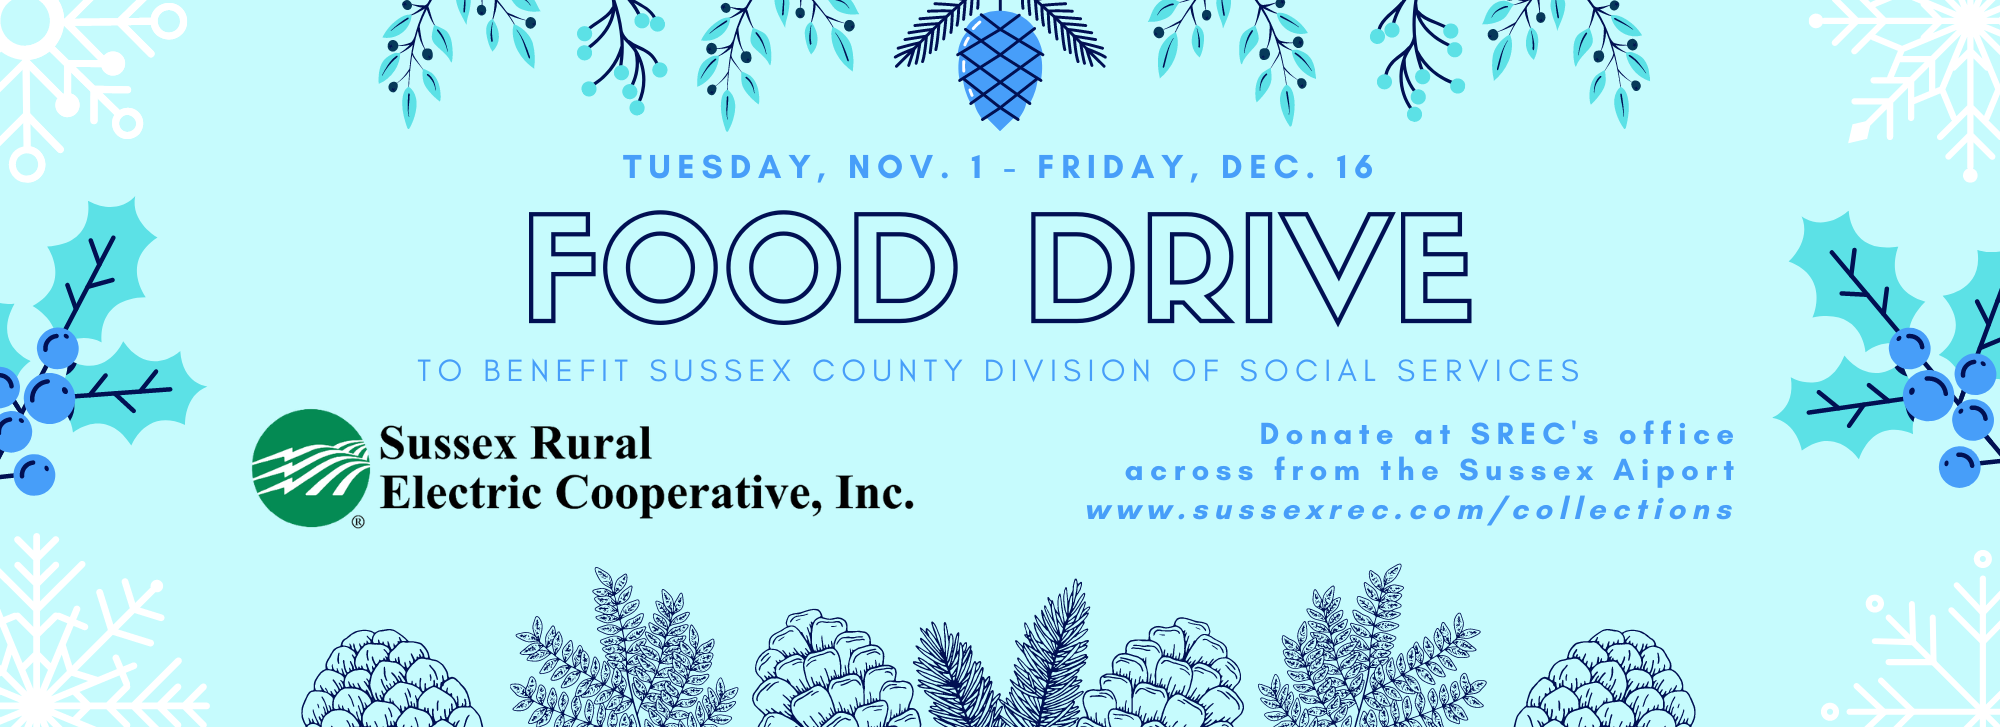 Light blue background with winter plantlife and snowflakes around the edges. Text reads: "Tuesday, Nov. 1 - Friday, Dec. 16 FOOD DRIVE to benefit Sussex County Division of Social Services. Donate at SREC's office across from the Sussex Airport. www.sussexrec.com/collections